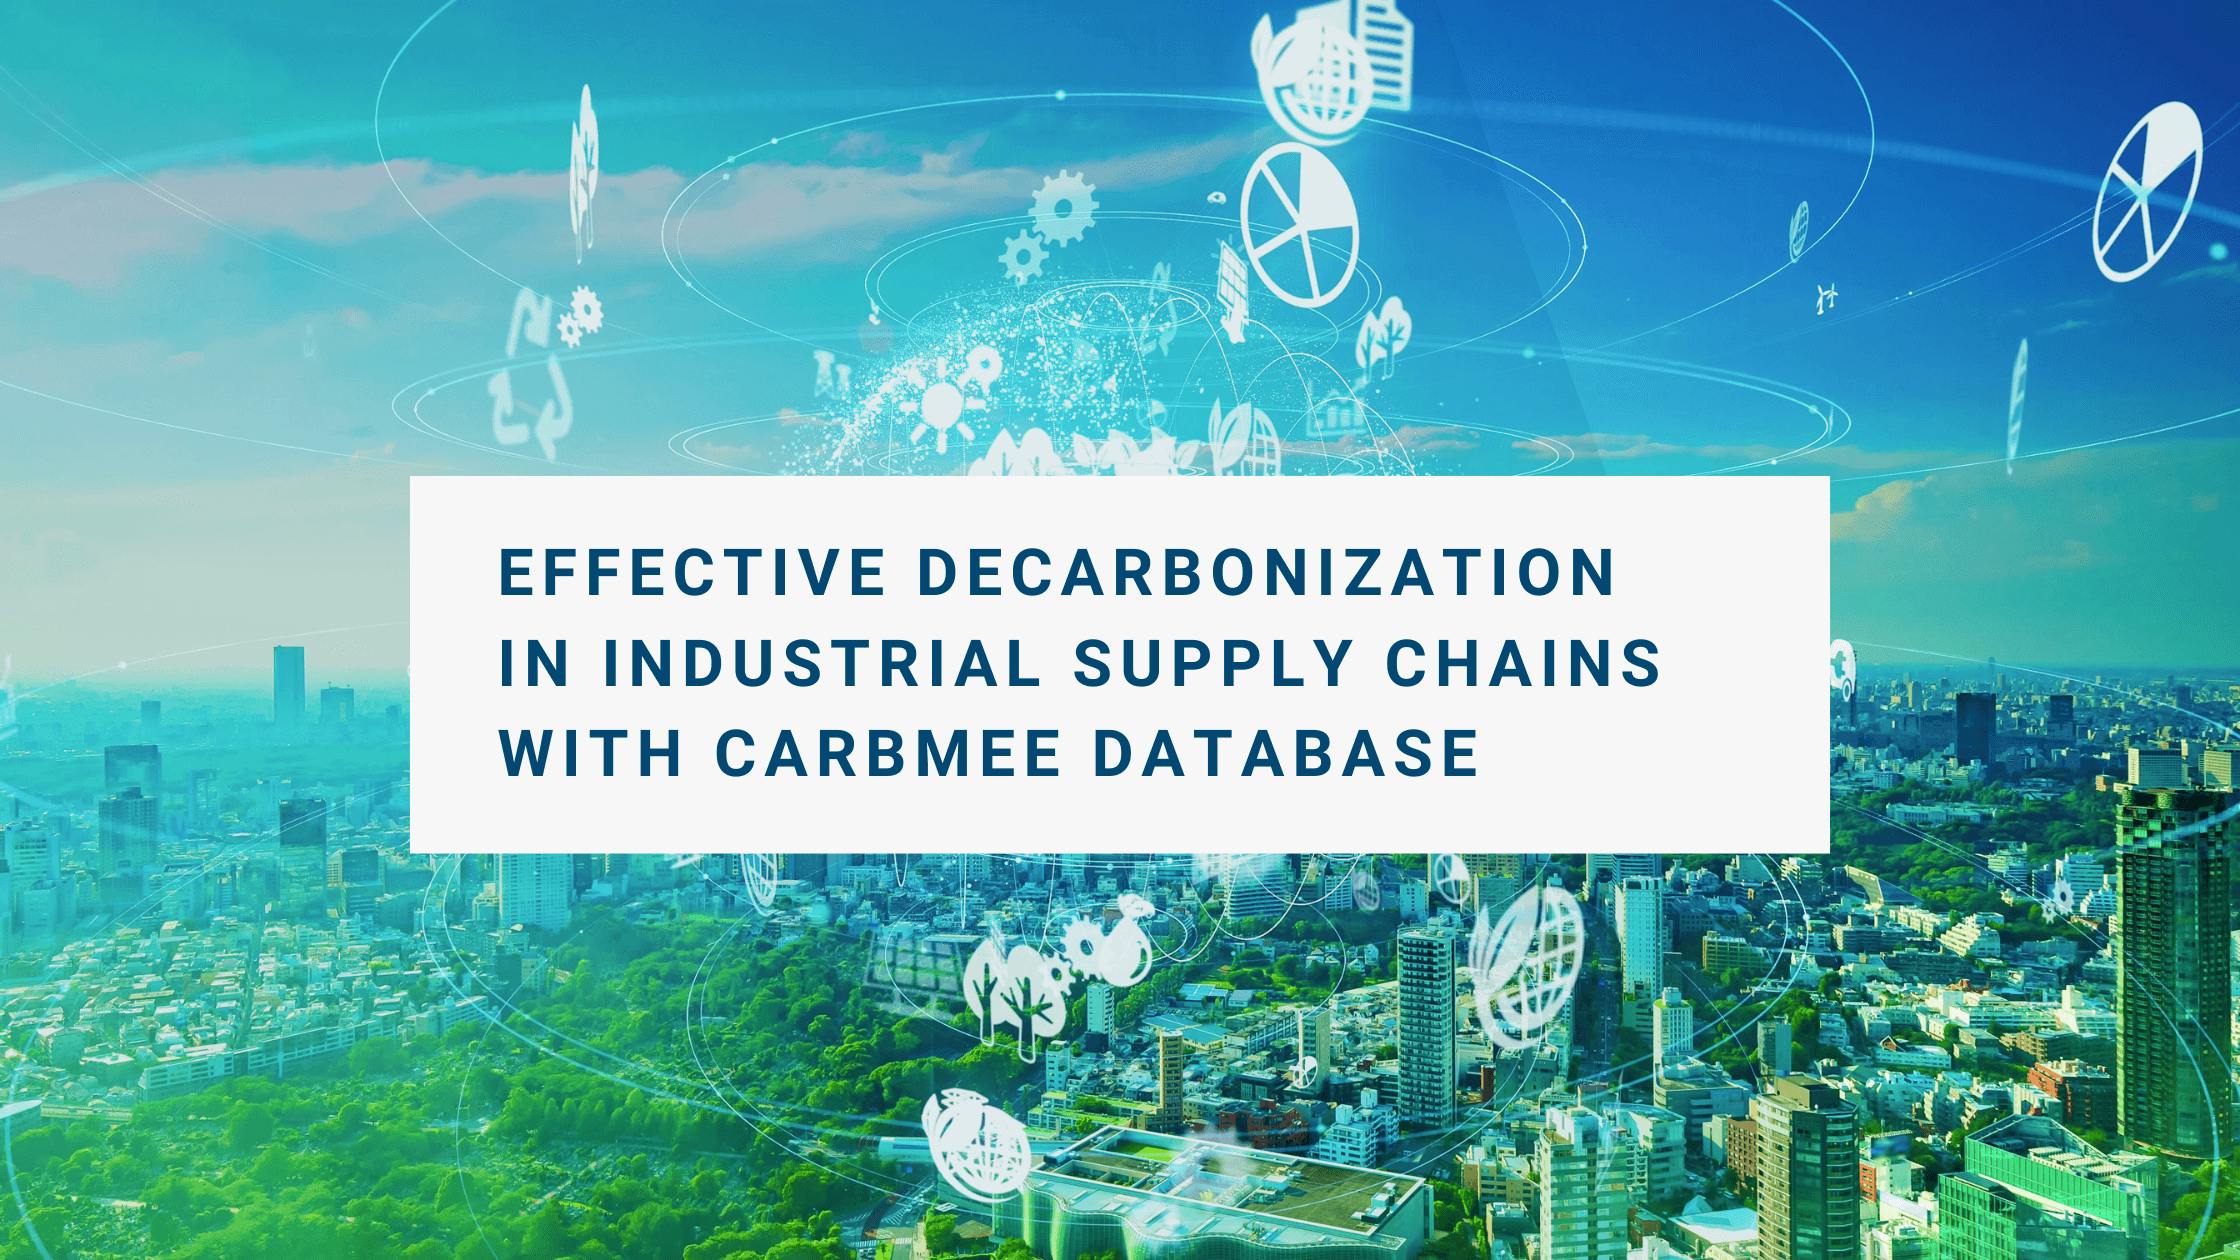 Effective Decarbonization in Industrial Supply Chains with carbmee database (carbmee DB)